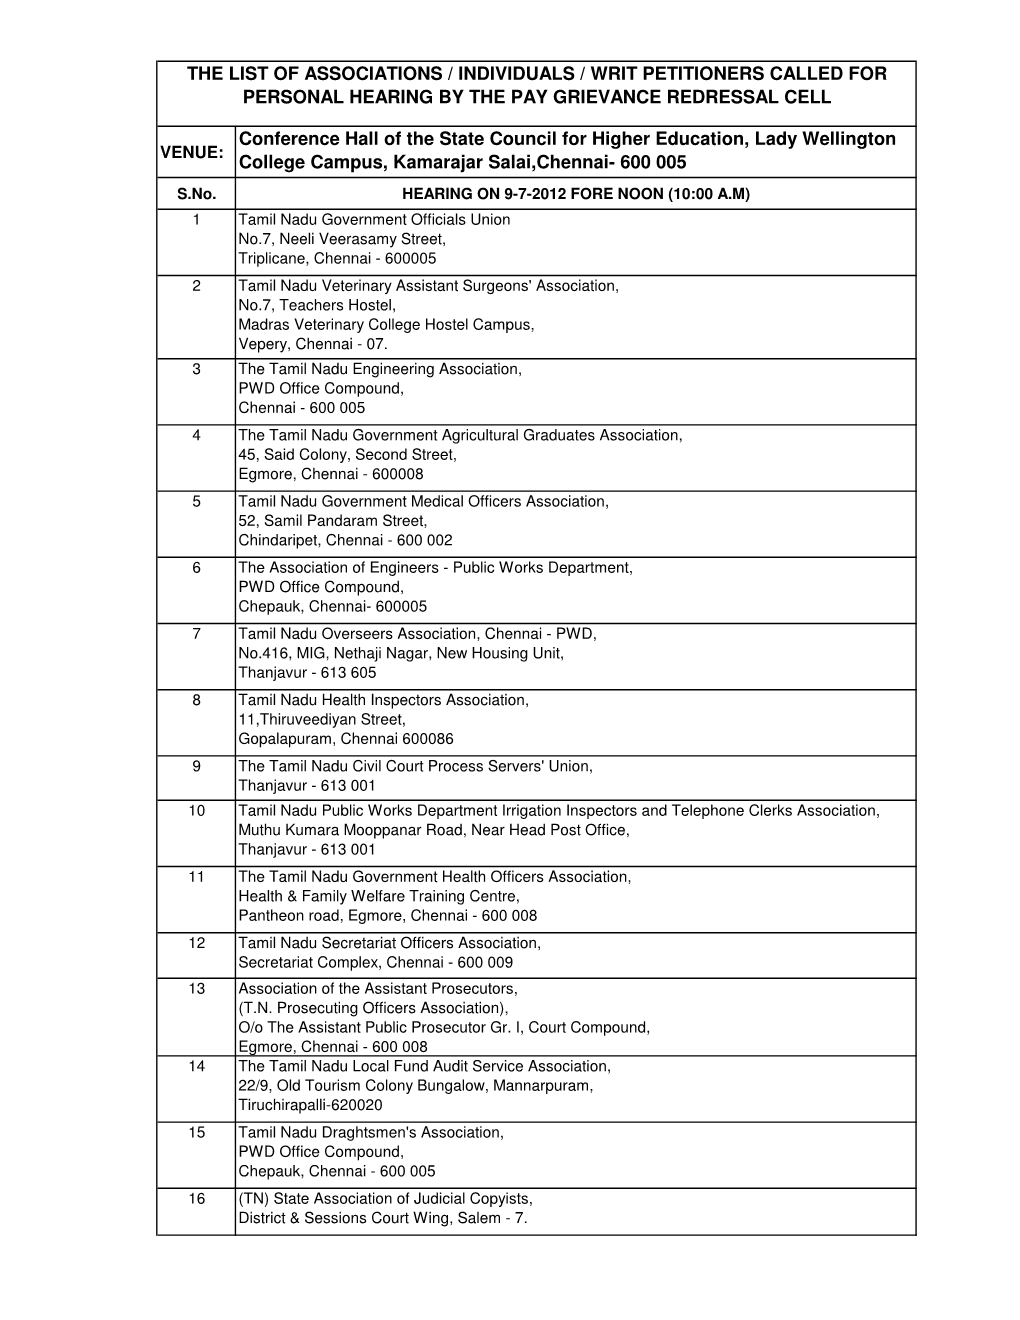 List of Associations / Individuals / Writ Petitioners Called for Personal Hearing by the Pay Grievance Redressal Cell